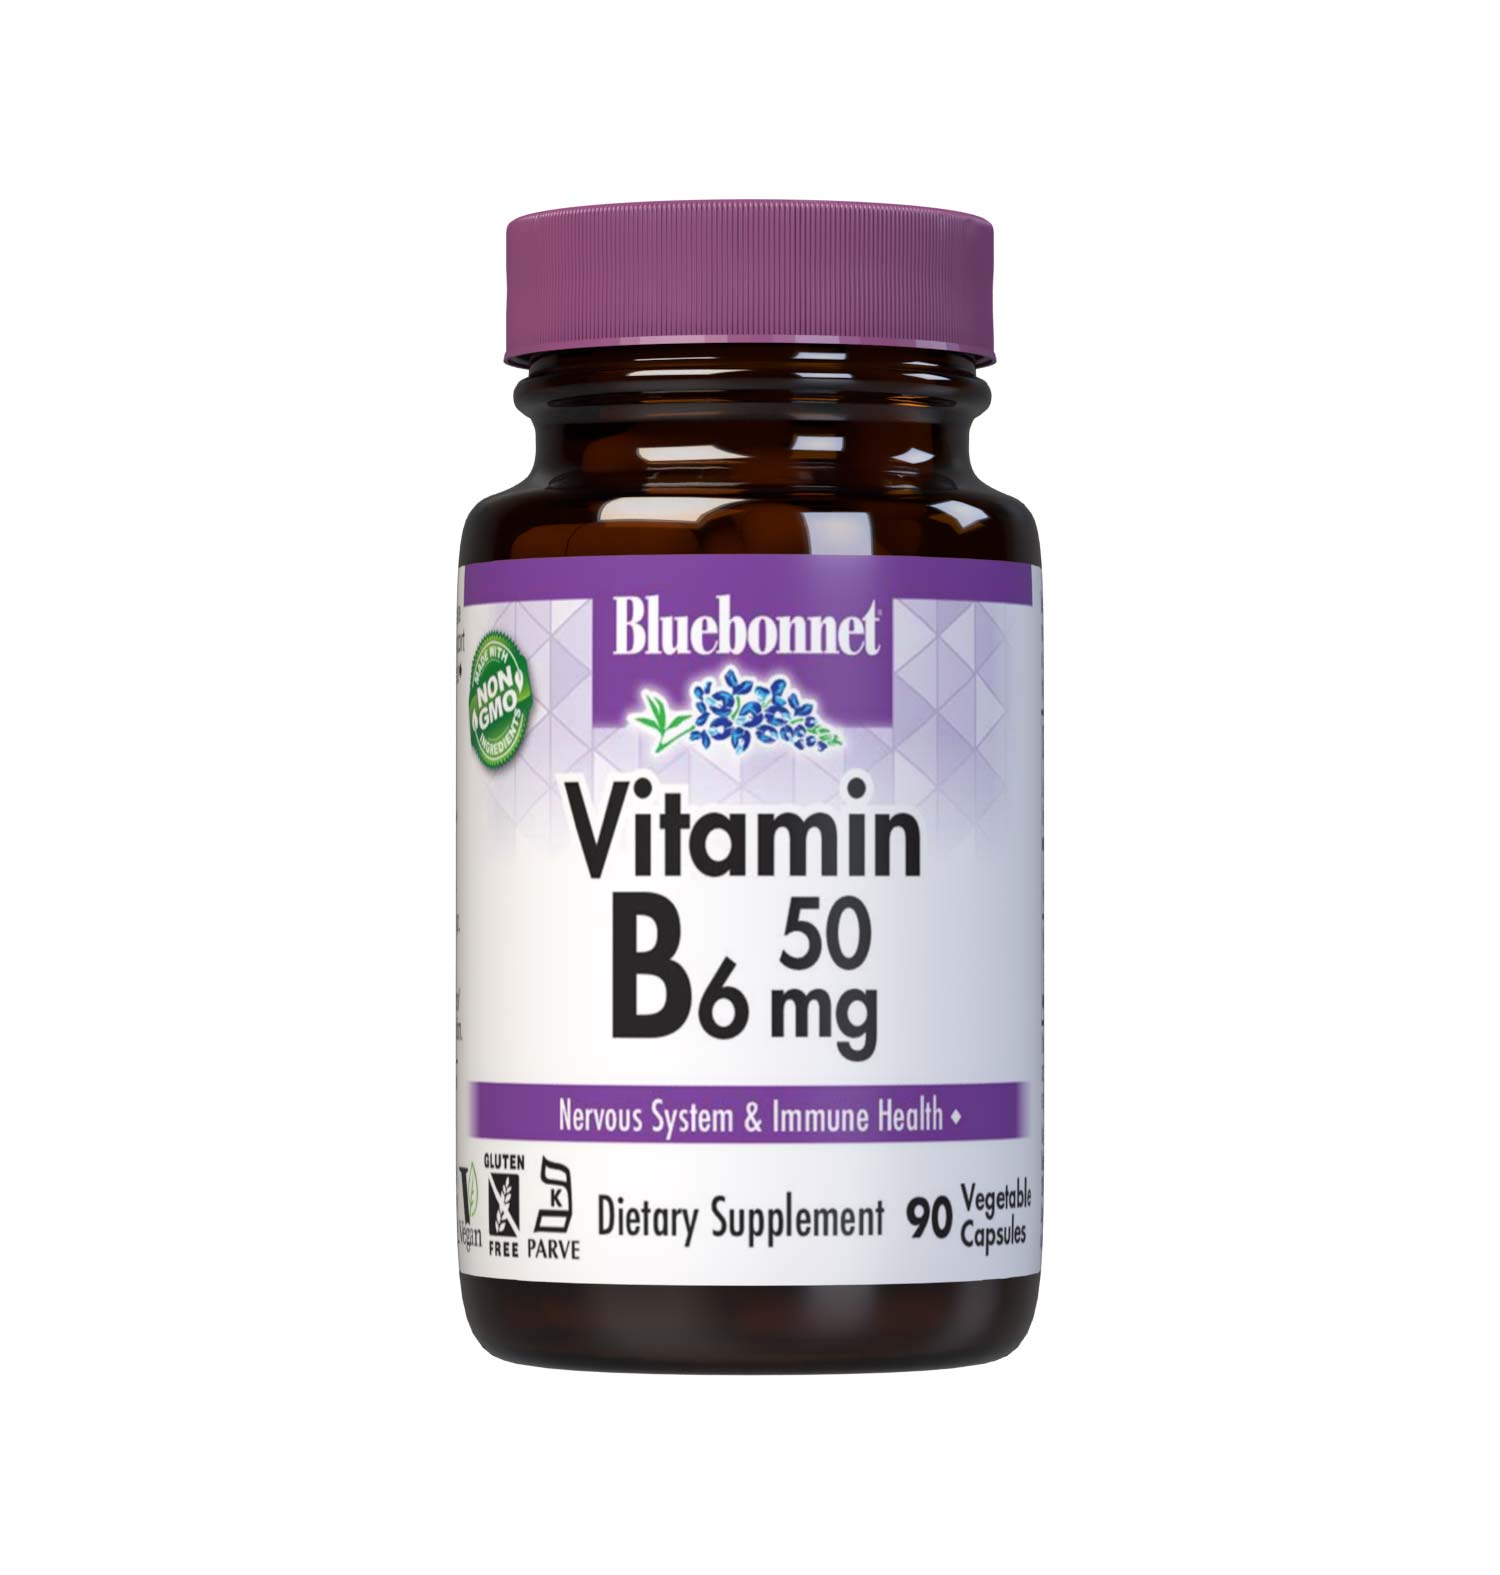 Bluebonnet’s Vitamin B6 50 mg Vegetable Capsules are formulated crystalline vitamin B6 (pyridoxine HCI) which may support nervous system and cardiovascular health. #size_90 count